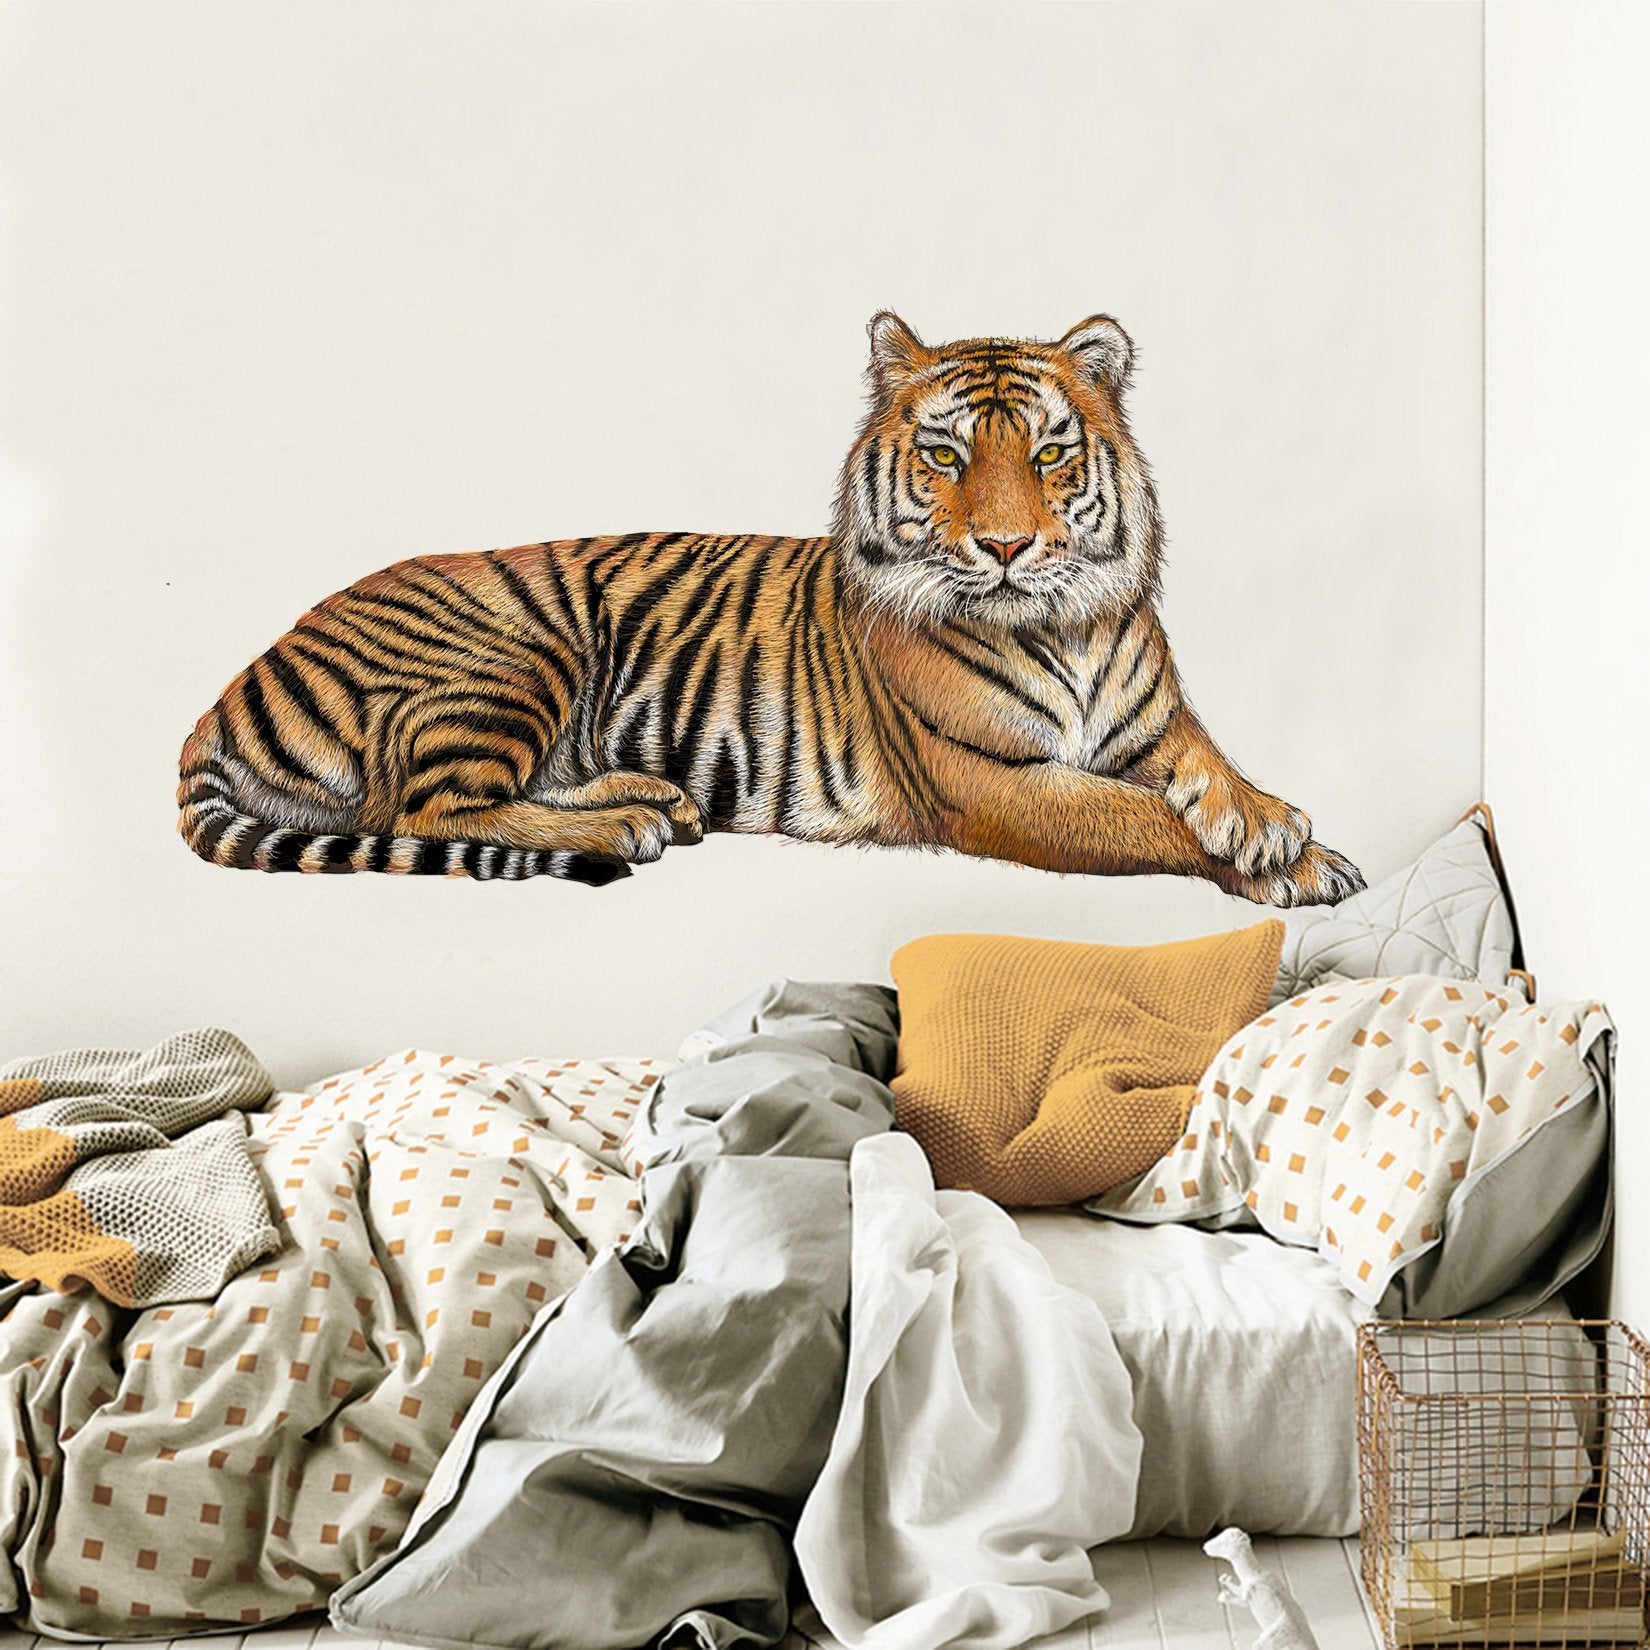 Custom Any Size Mural Wallpaper 3d Stereo Lion Tiger Animal Wall Painting  Kids Bedroom Living Room 3d Waterproof Wall Stickers - Wallpapers -  AliExpress